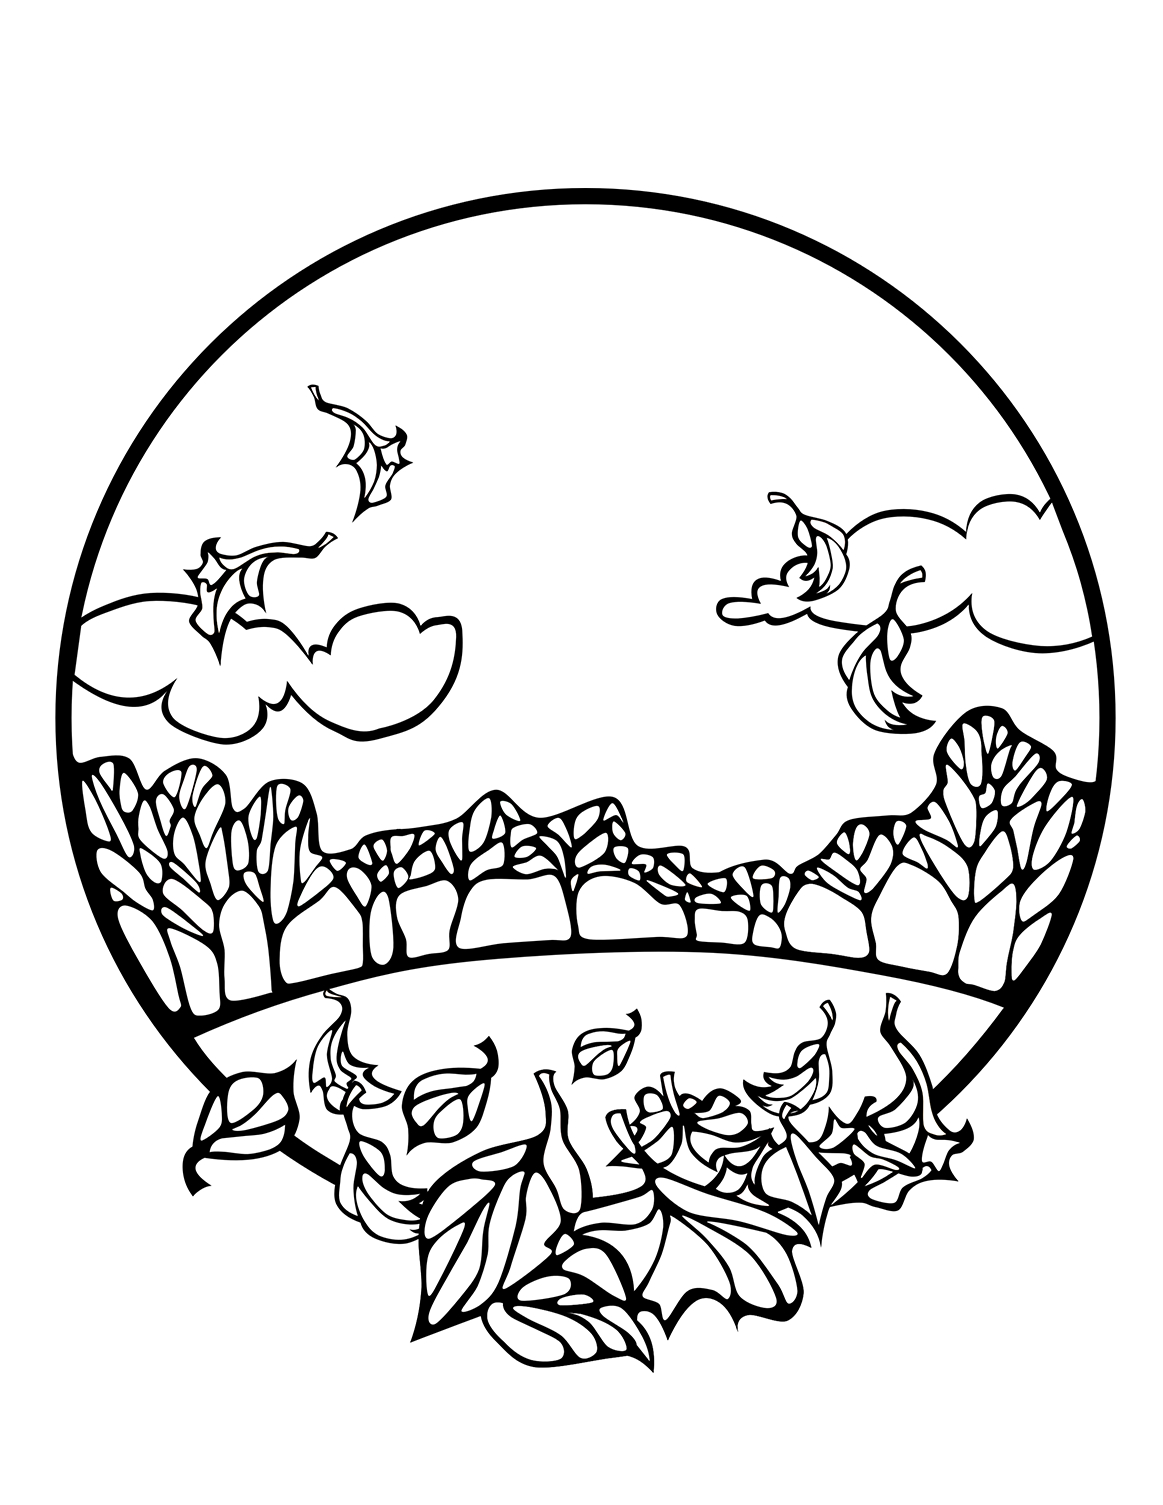 Coloring Pages Autumn Season 5 Fall Coloring Sheets Autumn Season Coloring Pages All Esl